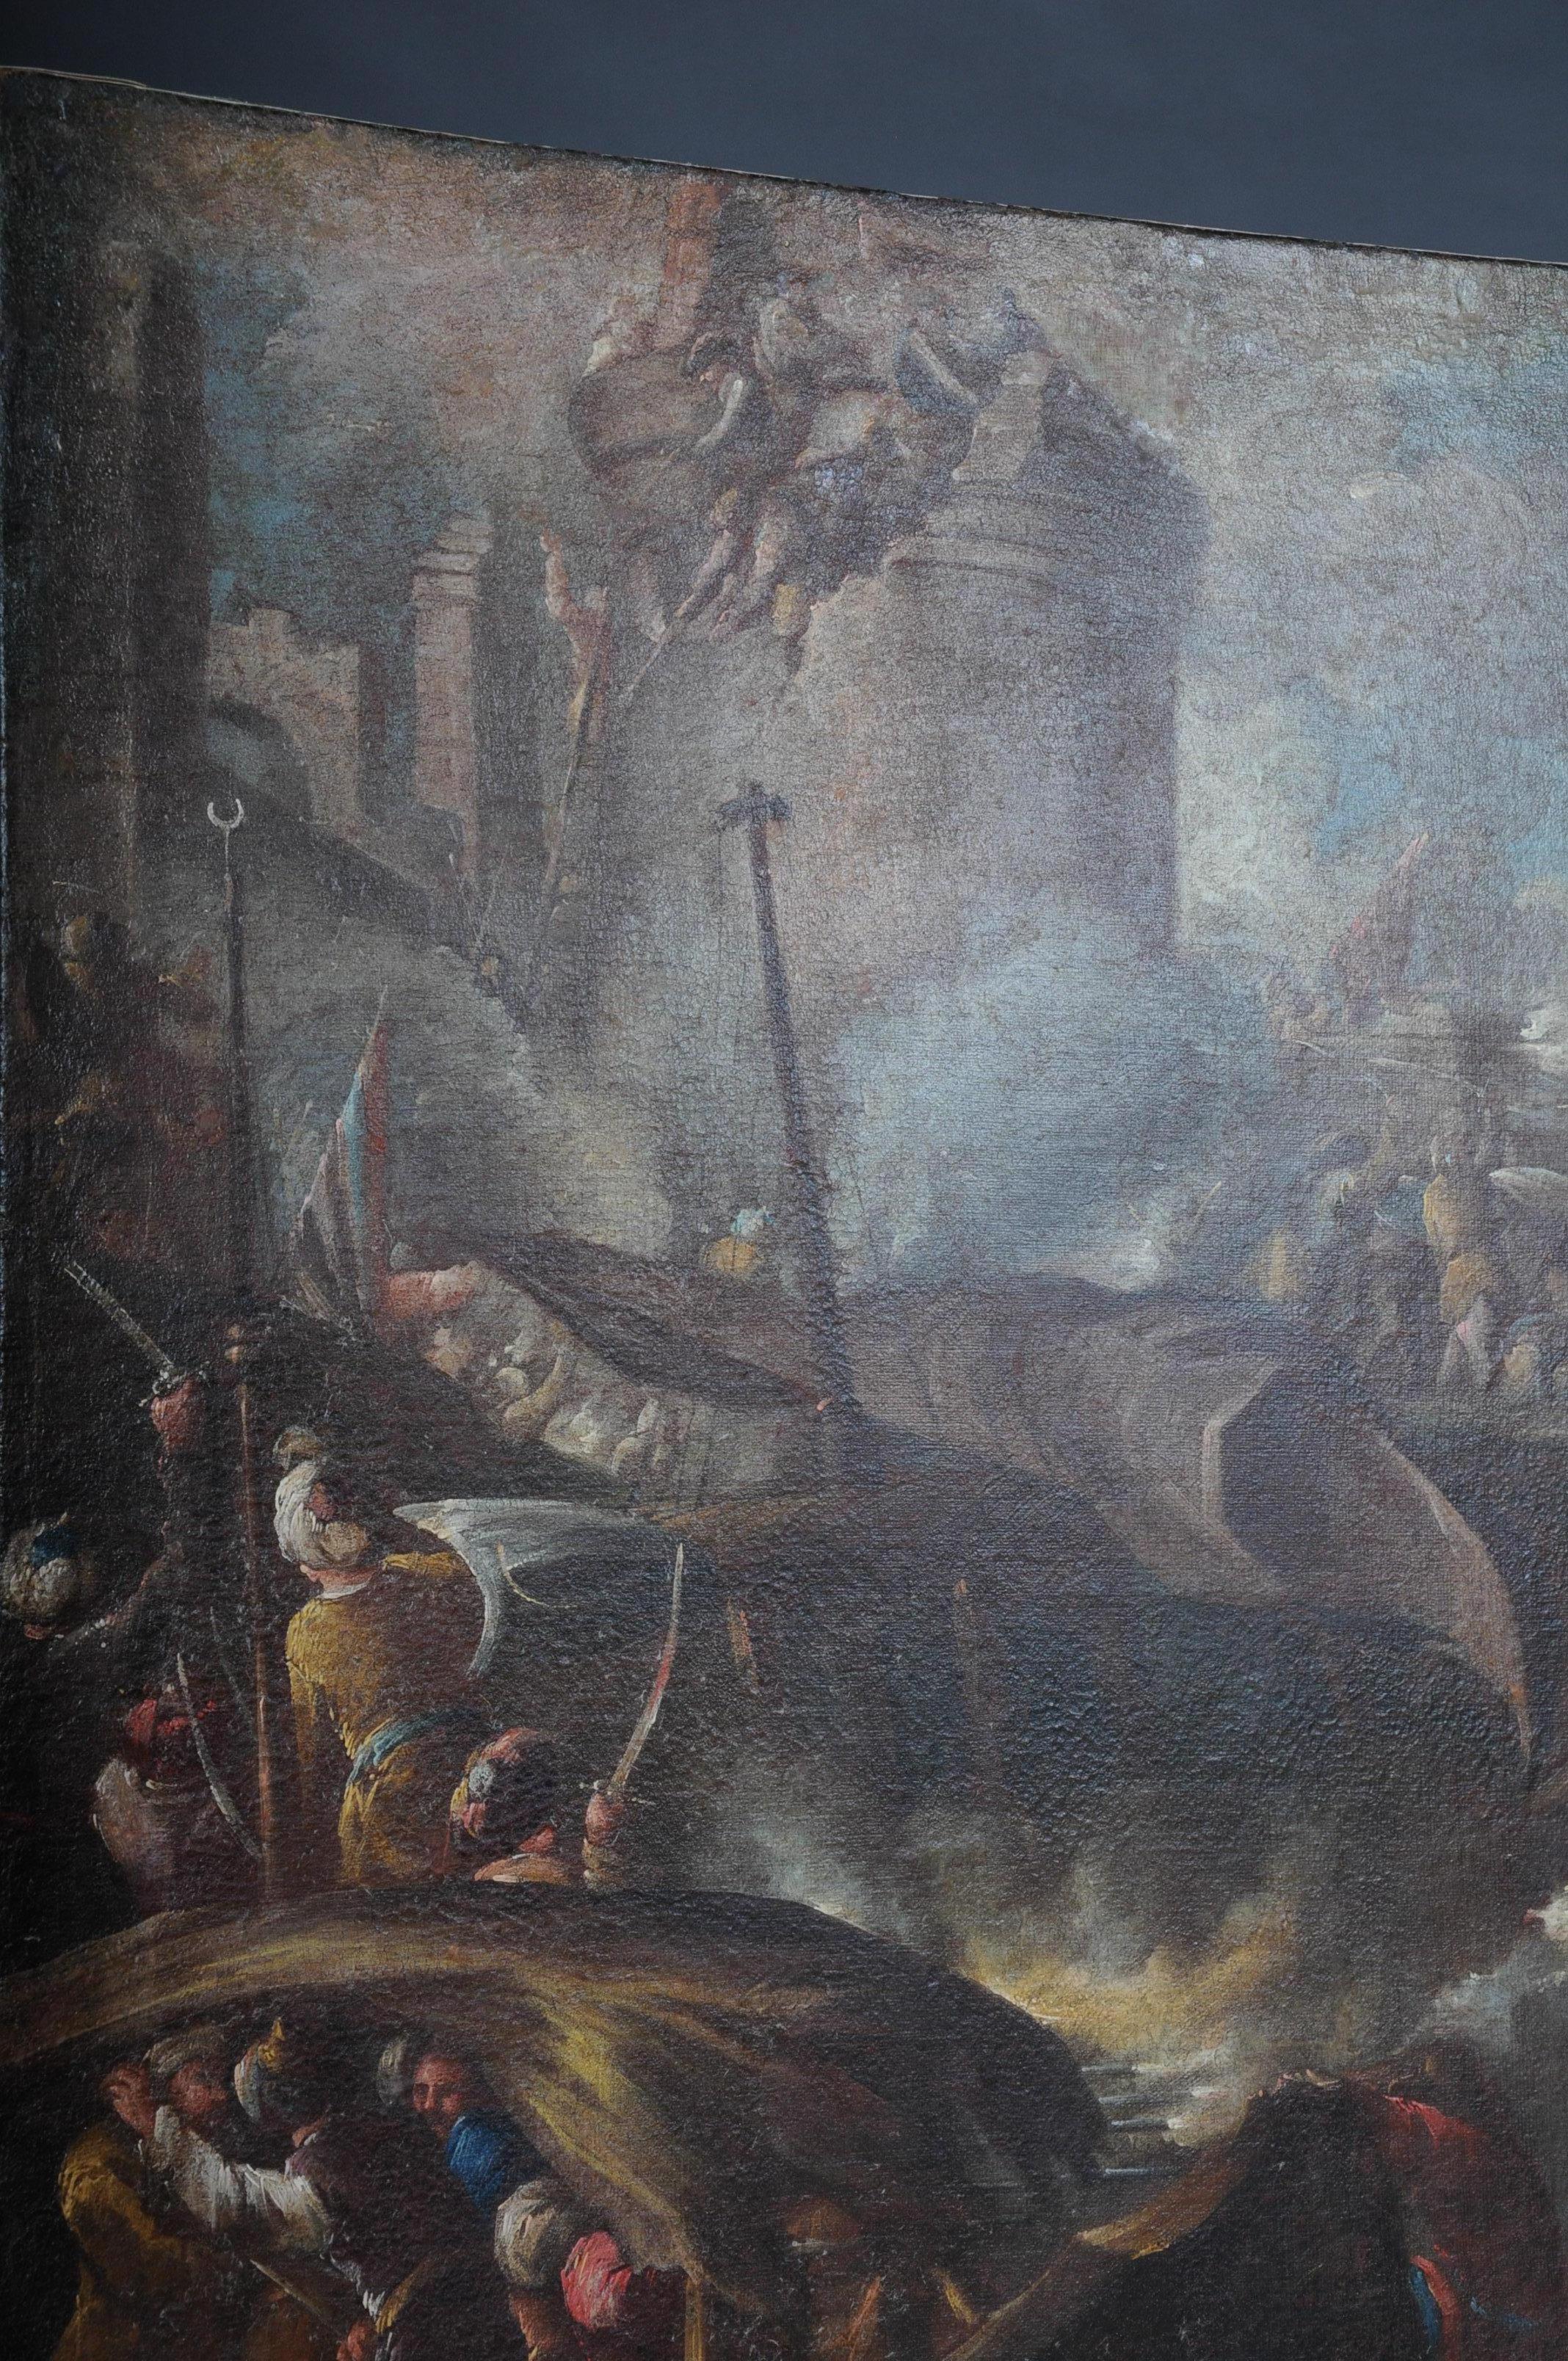 Ottomans Oil Painting Battle Scene from 1740 For Sale 6